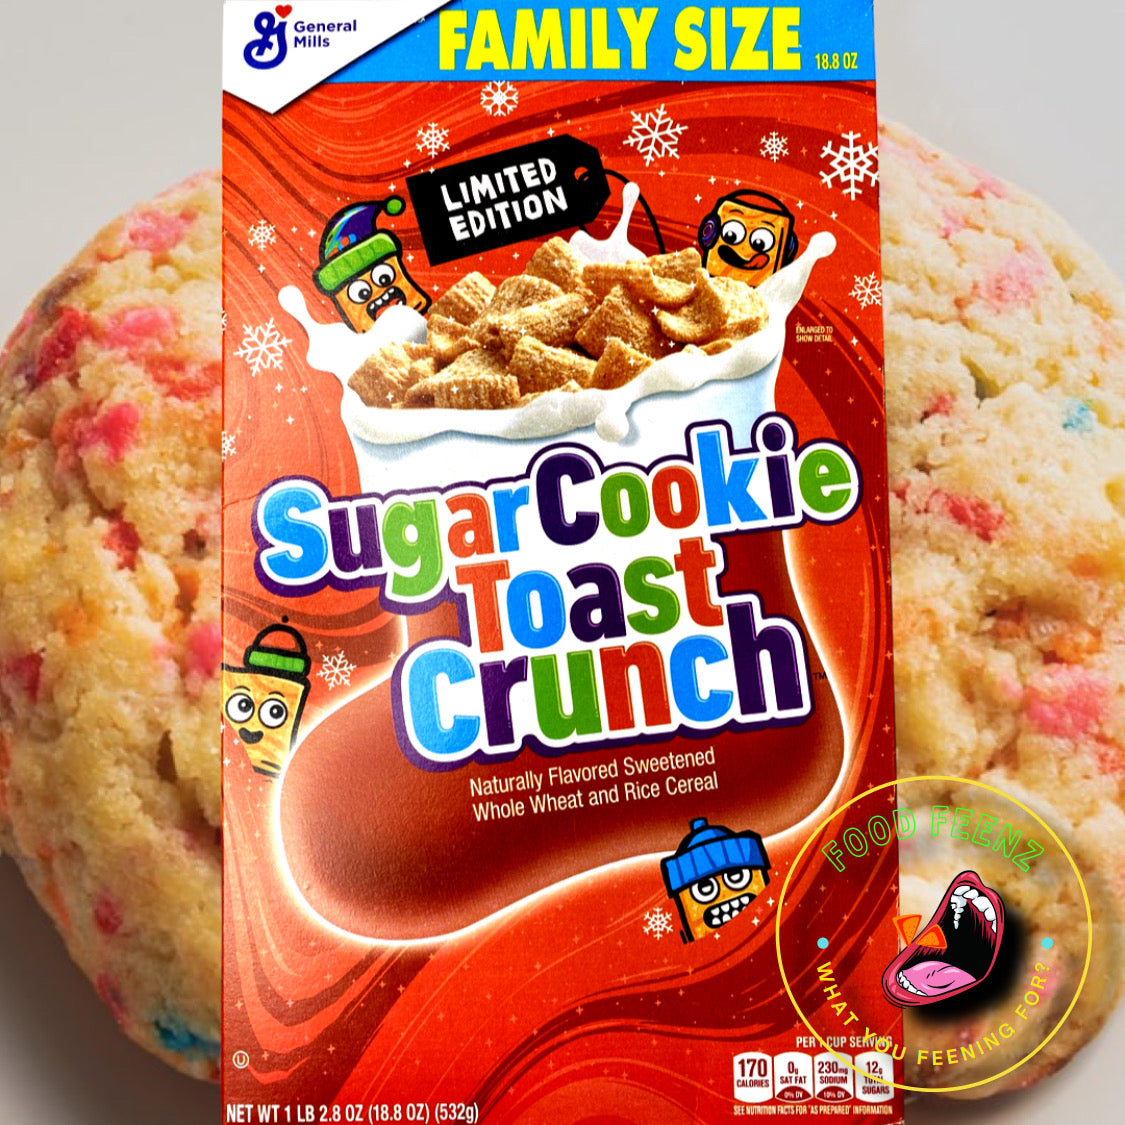 Sugar Cookie Toast Crunch Cereal (Family Size) - Limited Edition